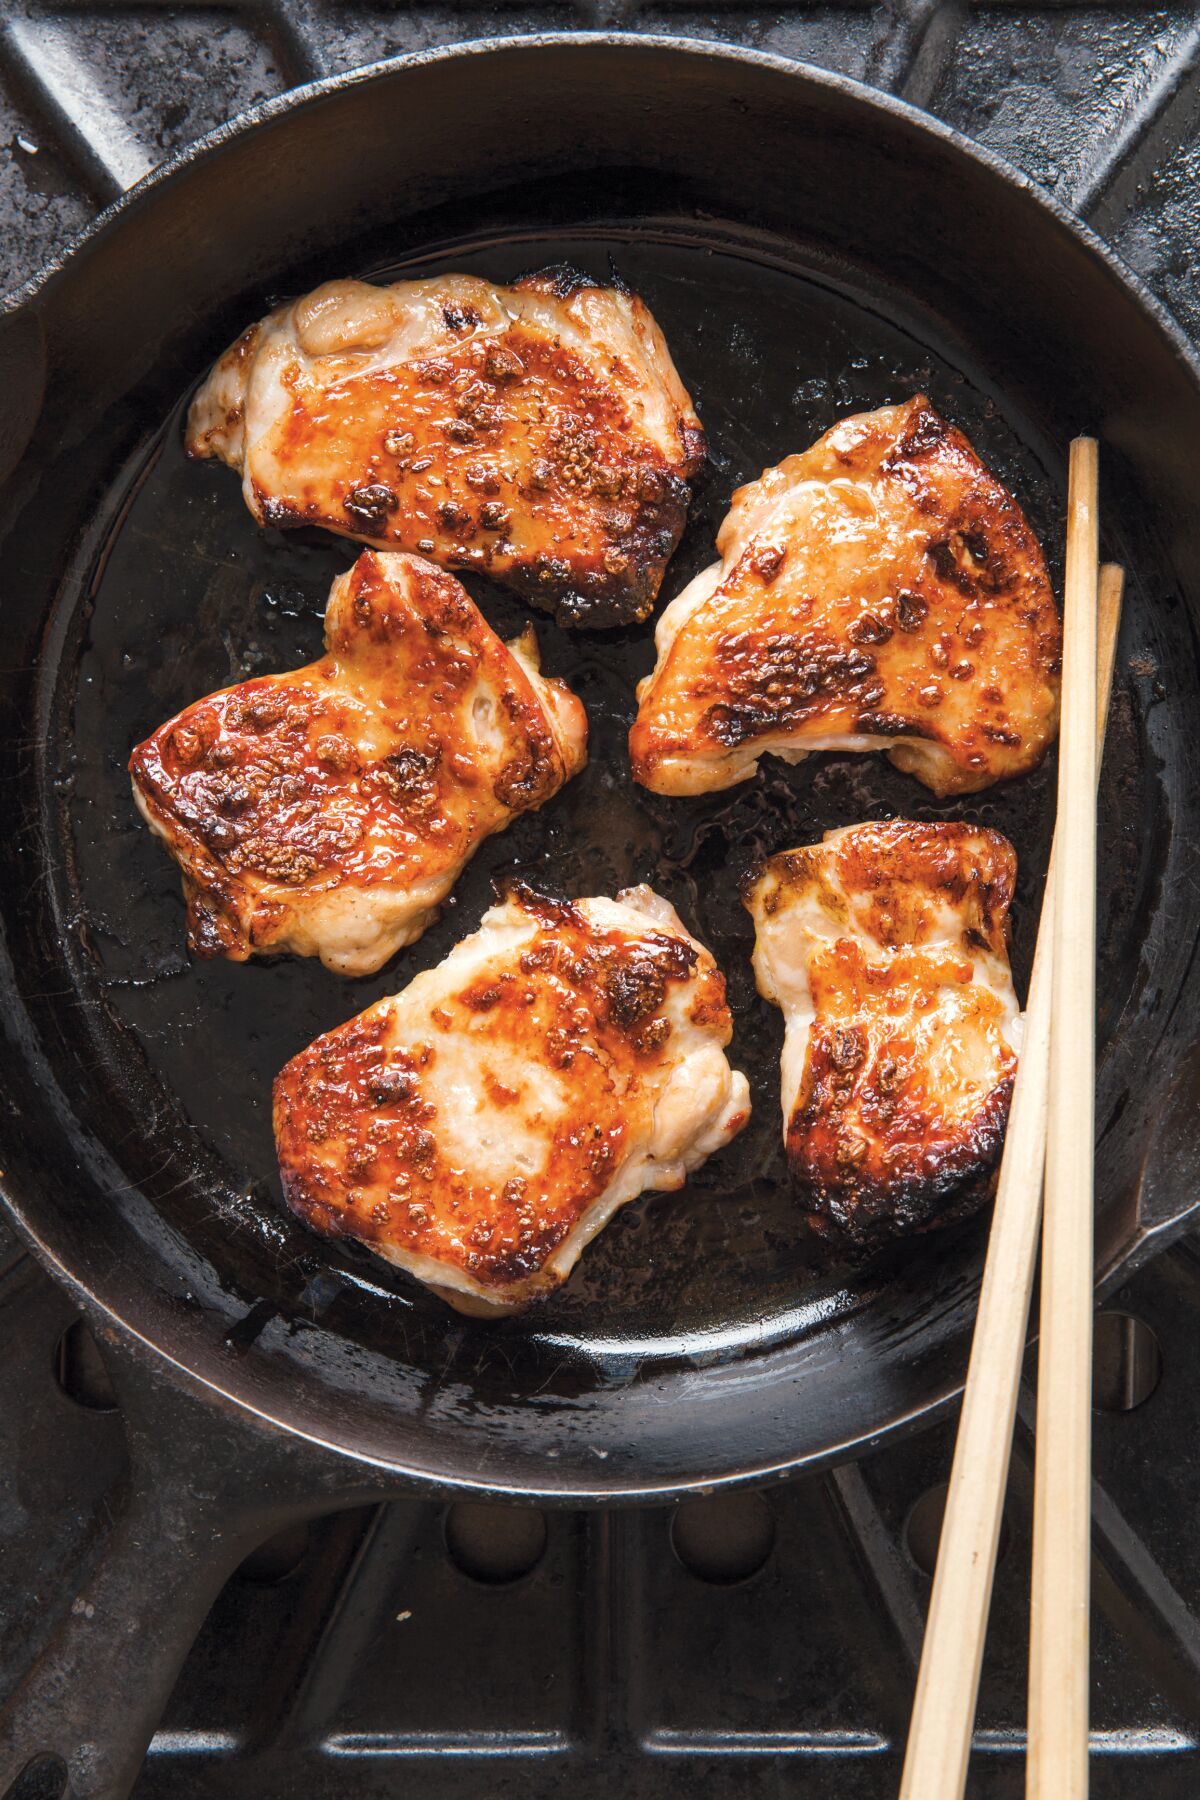 Grilled ginger chicken with shoyu tare from "Japanese Home Cooking" by Sonoko Sakai